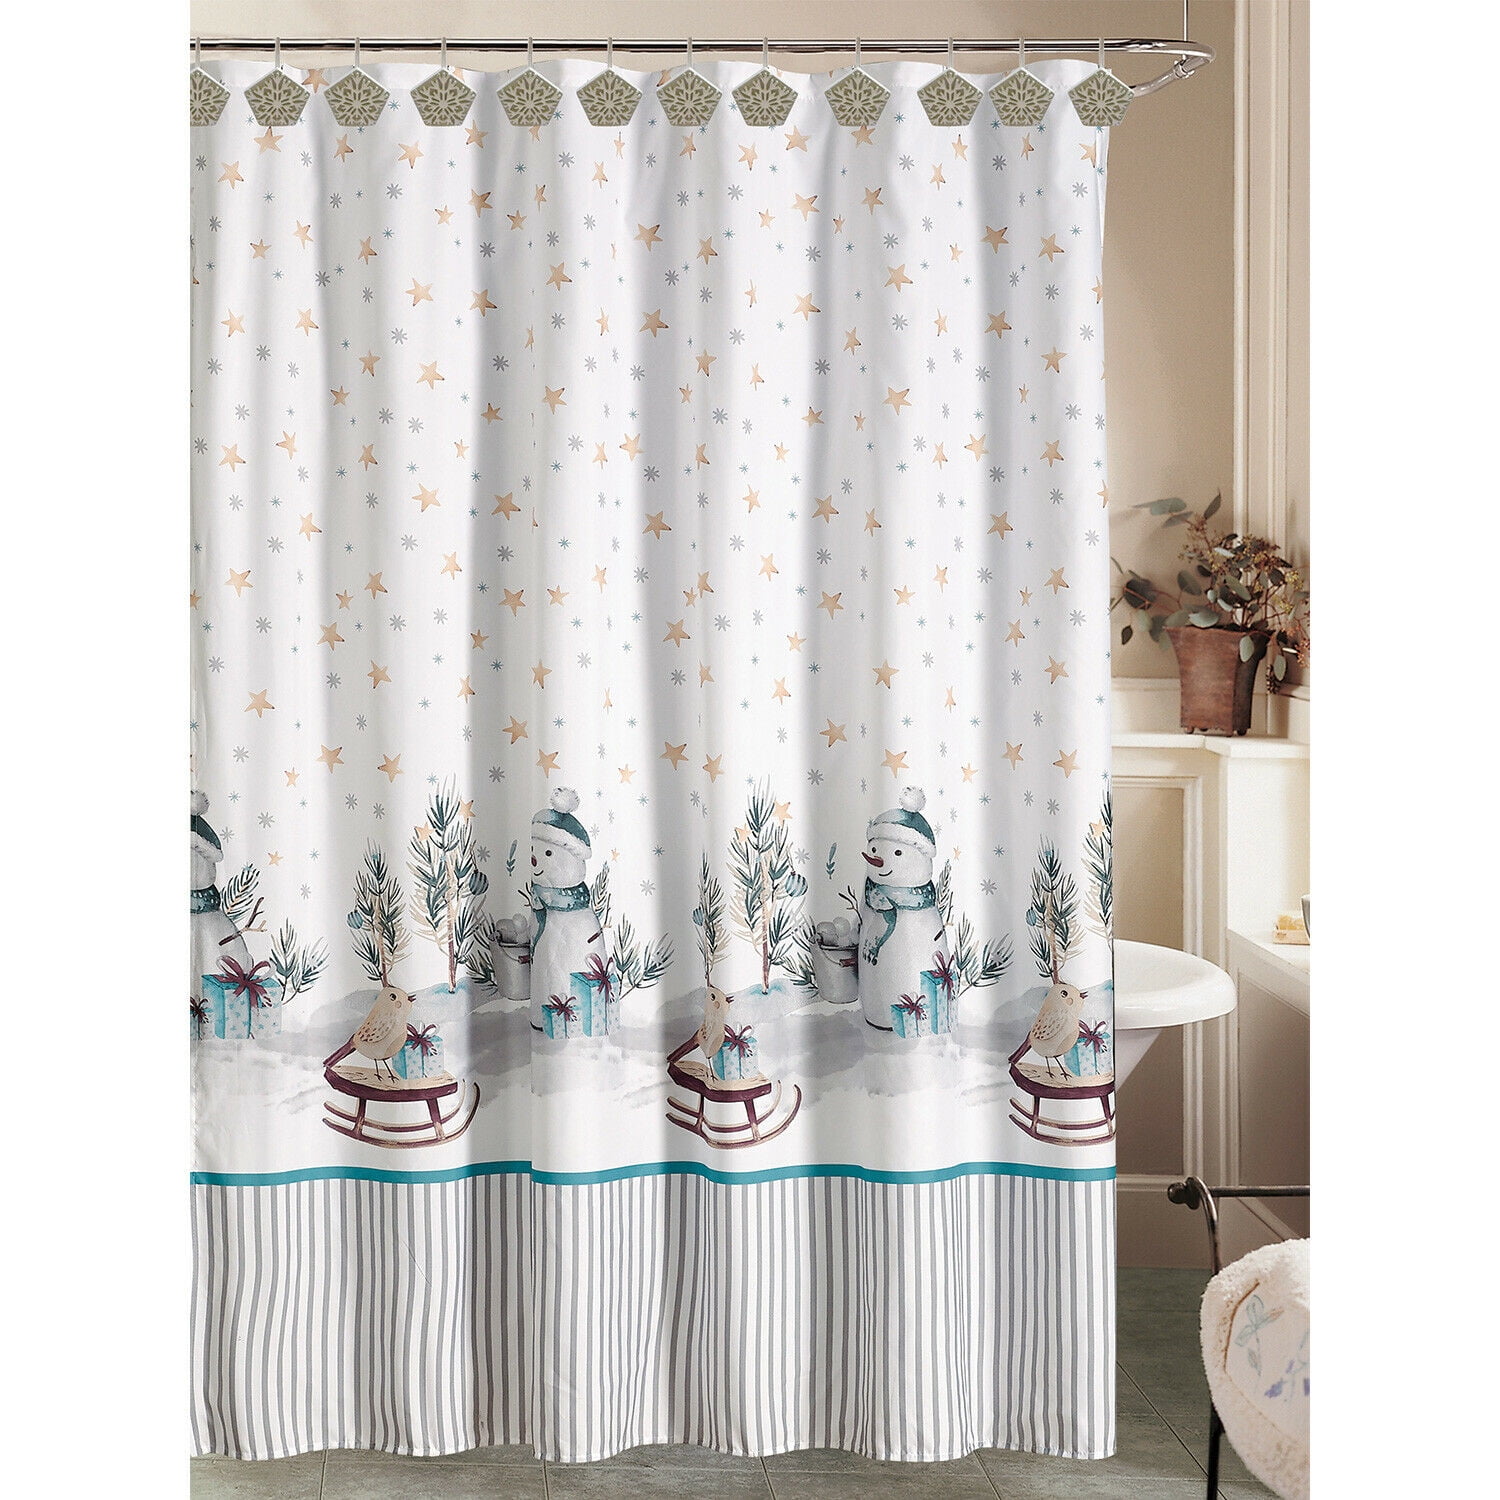 Striped Snowman Border Winter Holidays Shower Curtain Set with 12 Resin  Snowflake Hooks, Blue White Grey, 70-in. x 72-in. - Walmart.com